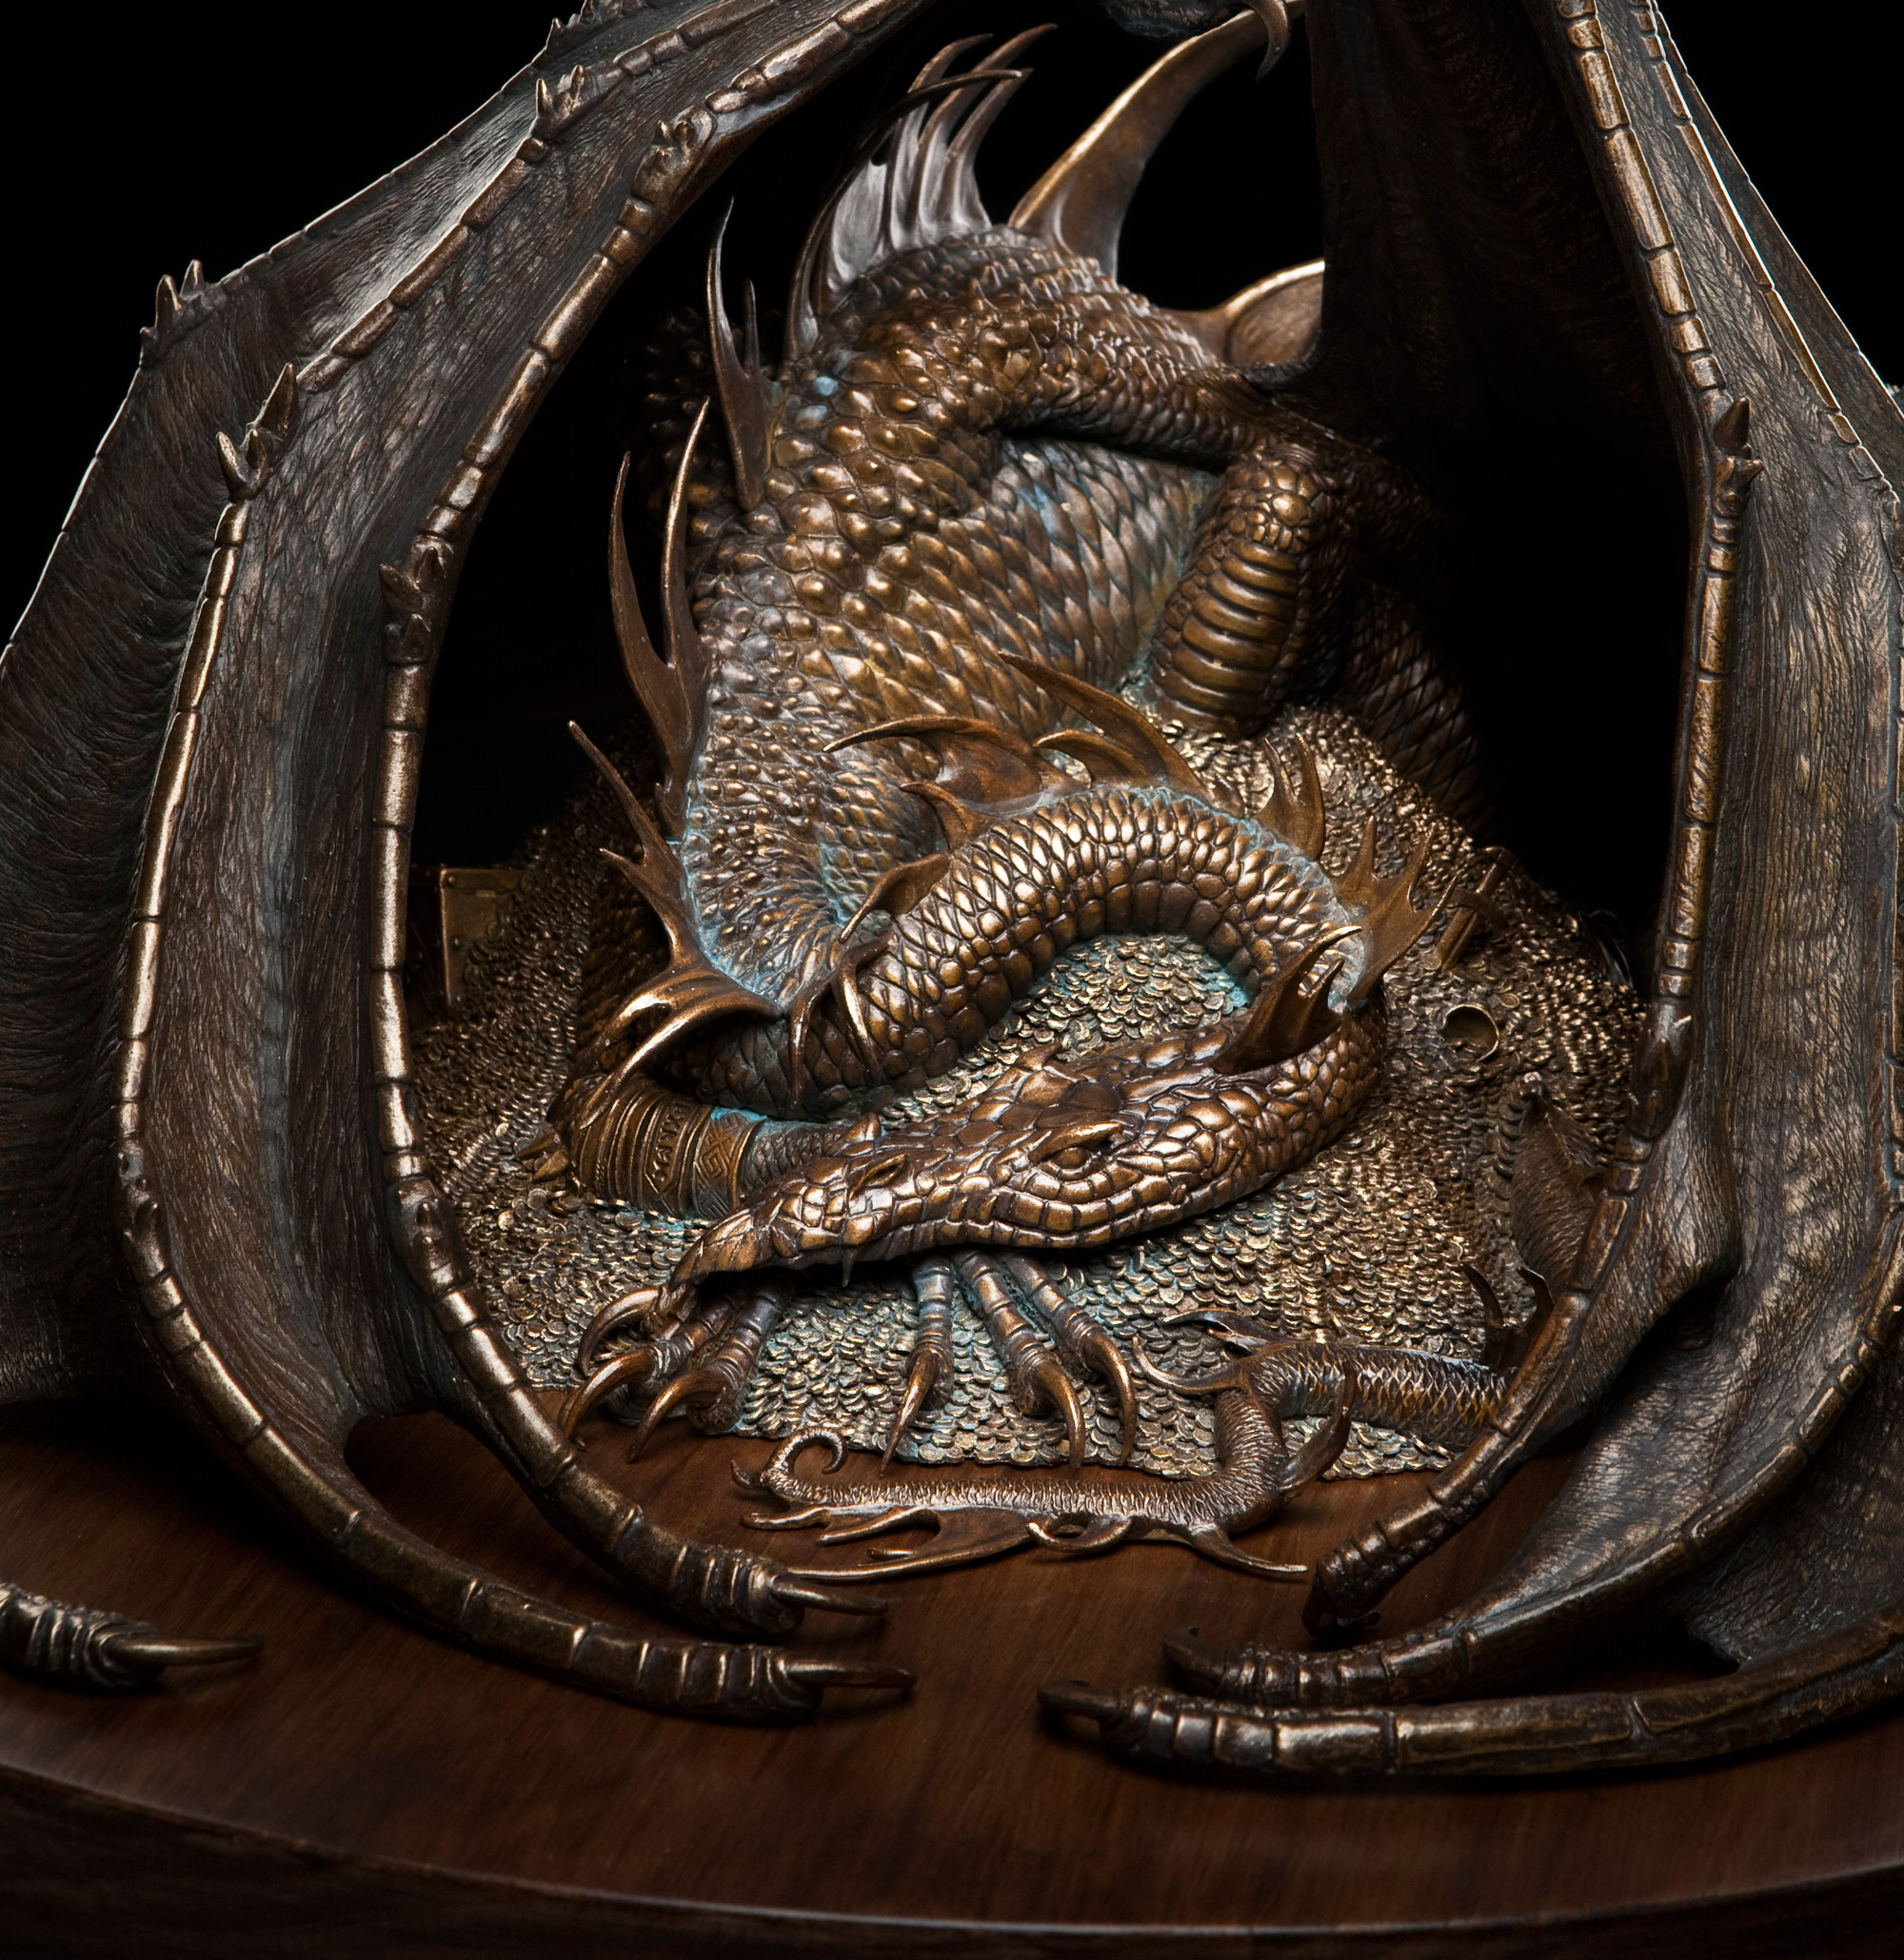 Image result for John Howe Smaug the Golden